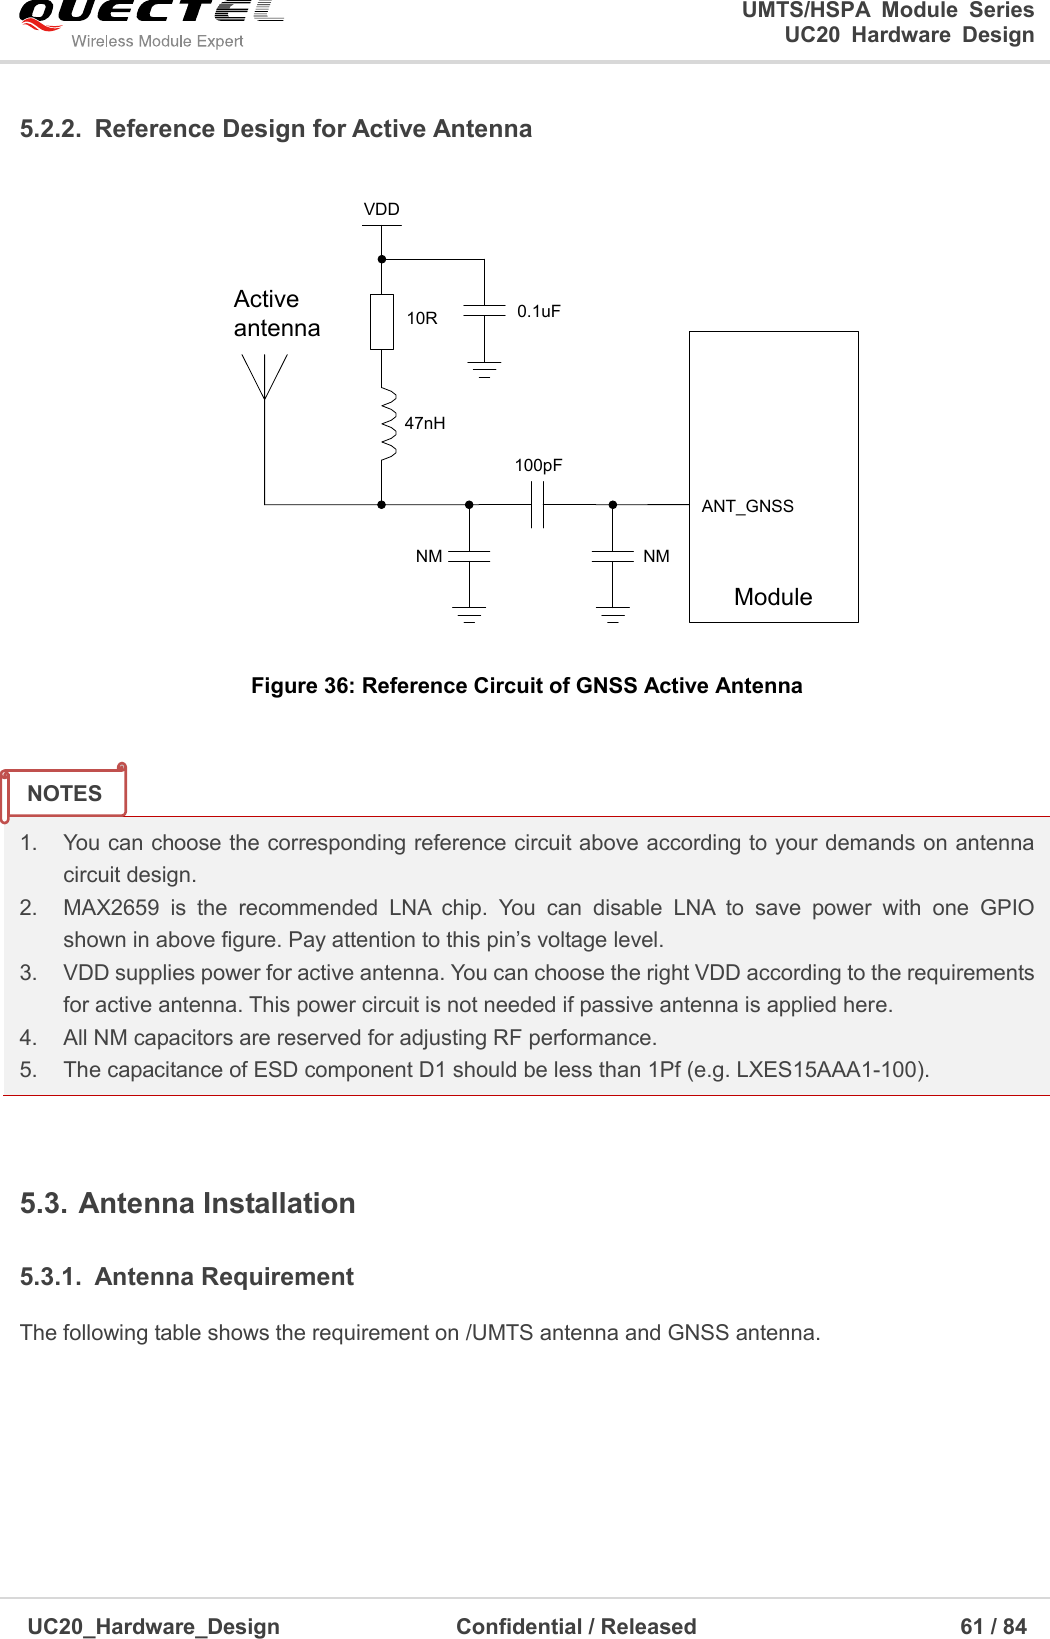                                                                                                                                               UMTS/HSPA  Module  Series                                                                 UC20  Hardware  Design  UC20_Hardware_Design                  Confidential / Released                            61 / 84     5.2.2.  Reference Design for Active Antenna ActiveantennaVDDModuleANT_GNSS47nH10R 0.1uF100pFNMNM Figure 36: Reference Circuit of GNSS Active Antenna   1.    You can choose the corresponding reference circuit above according to your demands on antenna   circuit design. 2.    MAX2659  is  the  recommended  LNA  chip.  You  can  disable  LNA  to  save  power  with  one  GPIO  shown in above figure. Pay attention to this pin’s voltage level. 3.    VDD supplies power for active antenna. You can choose the right VDD according to the requirements for active antenna. This power circuit is not needed if passive antenna is applied here. 4.    All NM capacitors are reserved for adjusting RF performance. 5.    The capacitance of ESD component D1 should be less than 1Pf (e.g. LXES15AAA1-100).  5.3. Antenna Installation 5.3.1.  Antenna Requirement The following table shows the requirement on /UMTS antenna and GNSS antenna.    NOTES 